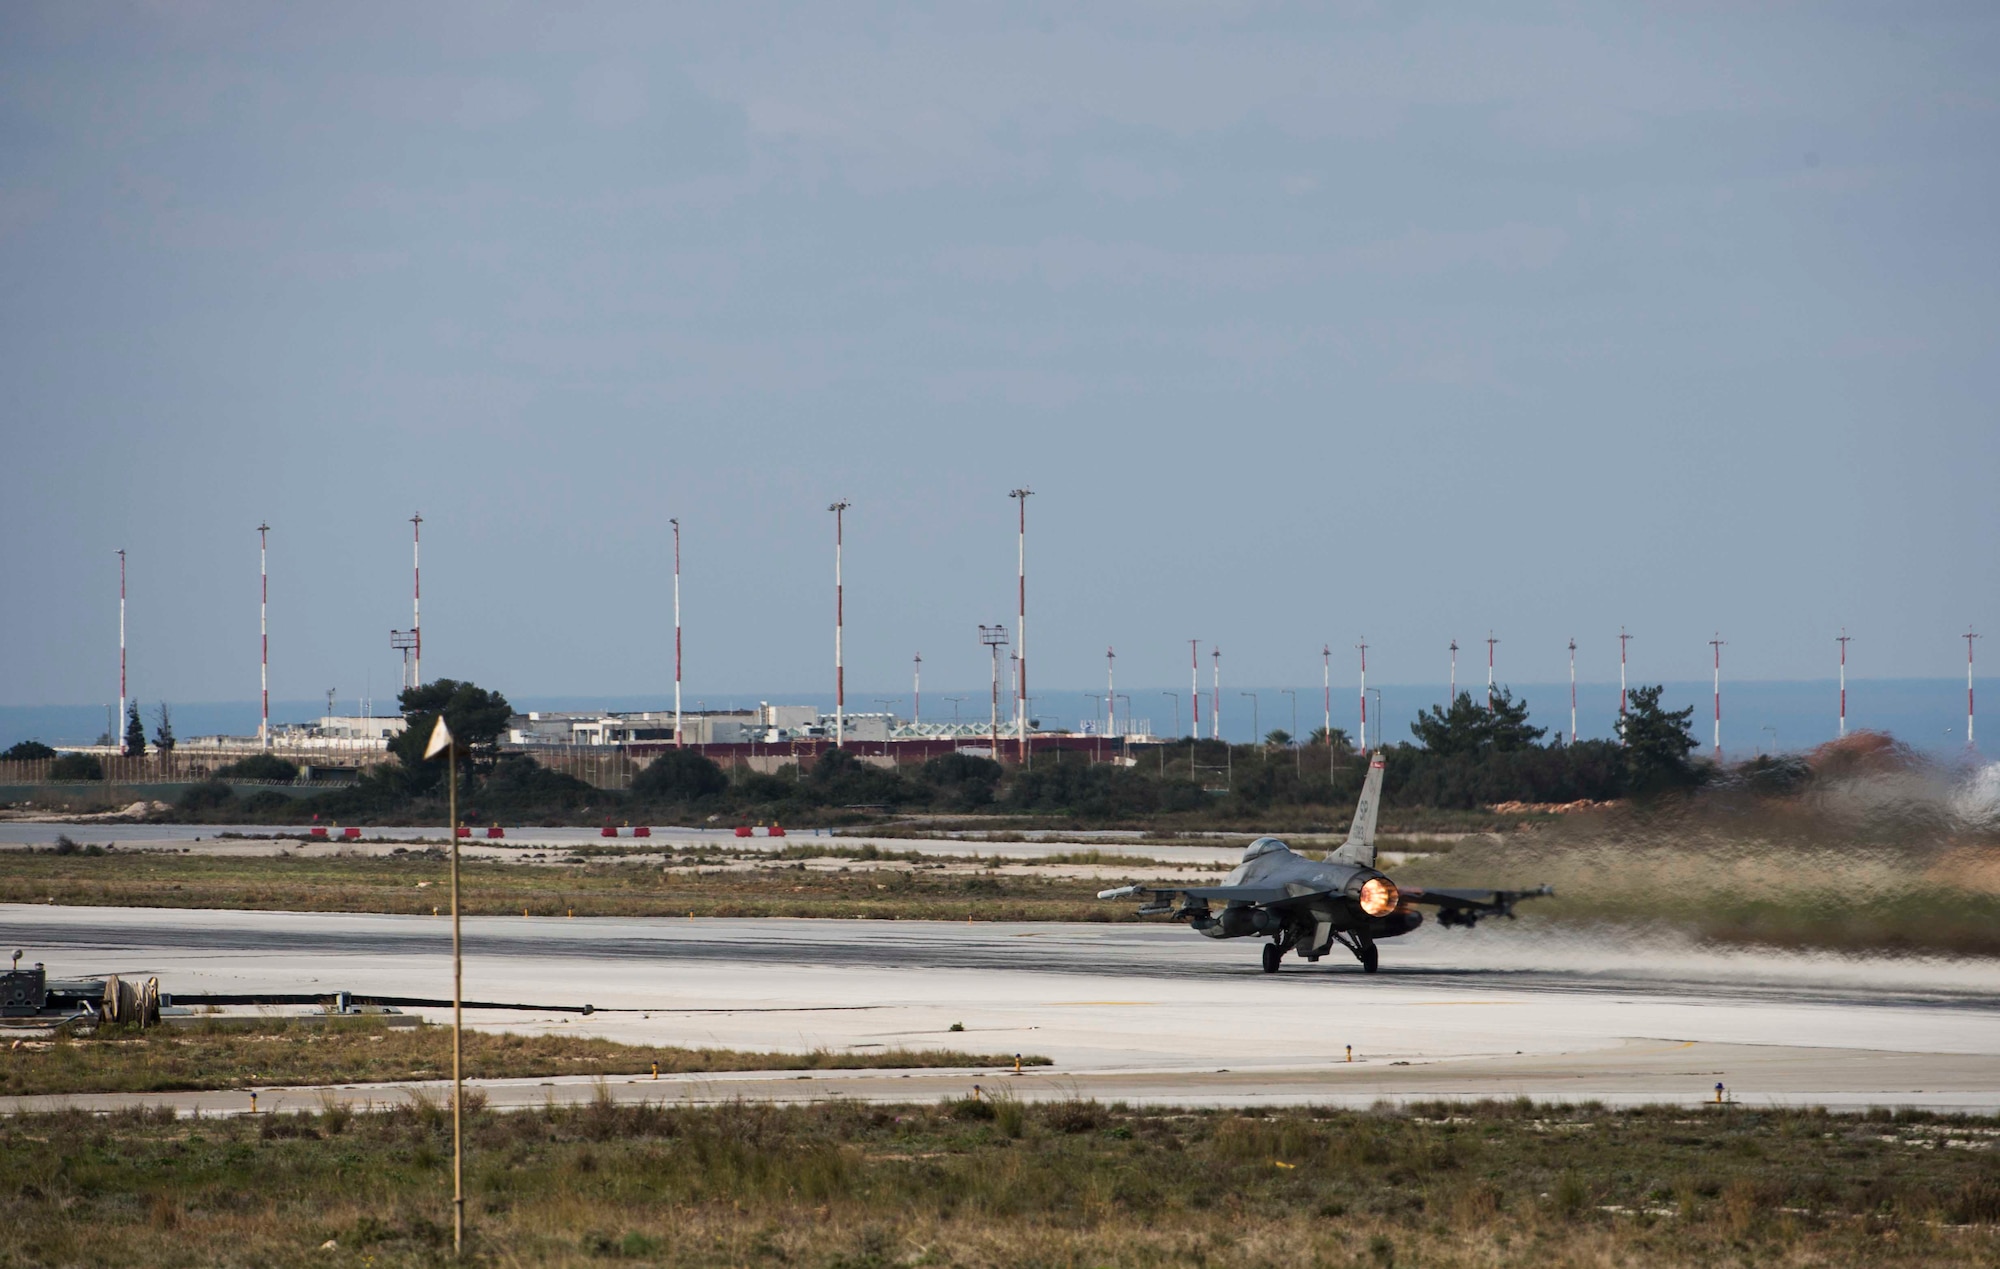 A U.S. Air Force F-16 Fighting Falcon fighter aircraft pilot launches his jet during a flying training deployment on the runway at Souda Bay, Greece, Jan. 27, 2016.  The training included more than 15 aircraft launches a day as part of the training between the U.S. and Hellenic air forces. (U.S. Air Force photo by Staff Sgt. Christopher Ruano/Released)